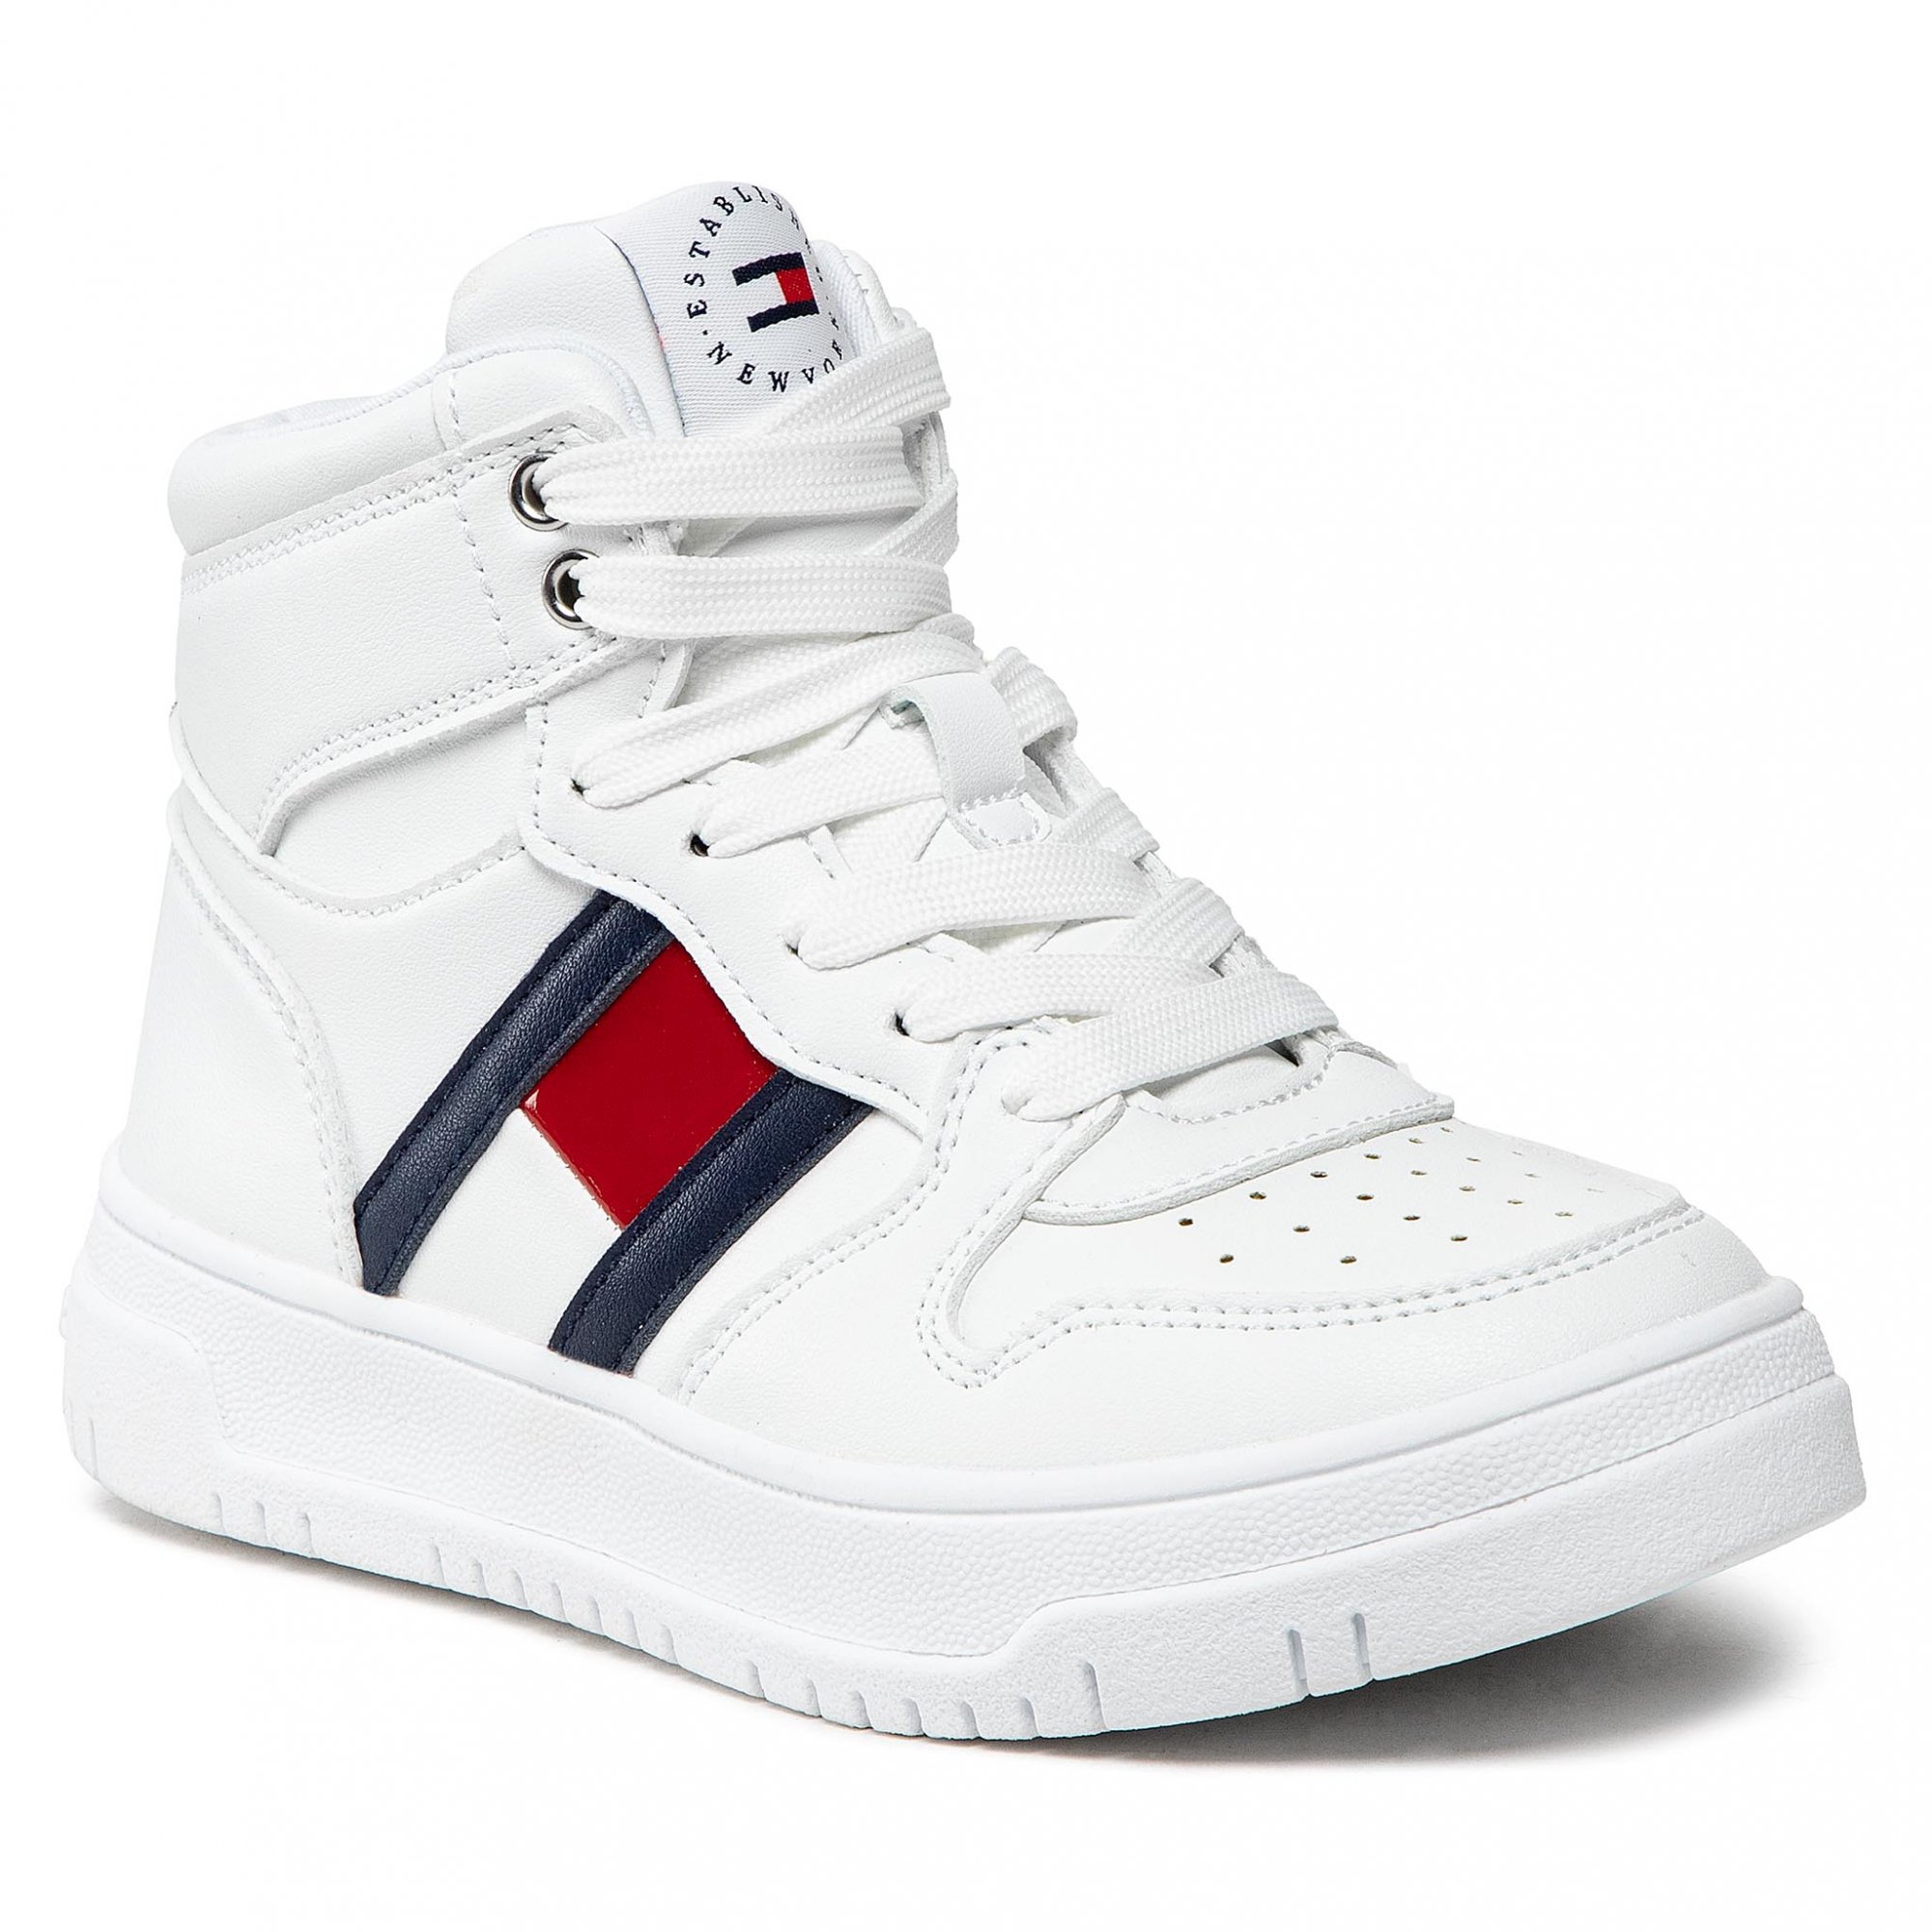 TOMMY HILFIGER High Top Lace-Up Sneaker T3A9-32345-1351 M